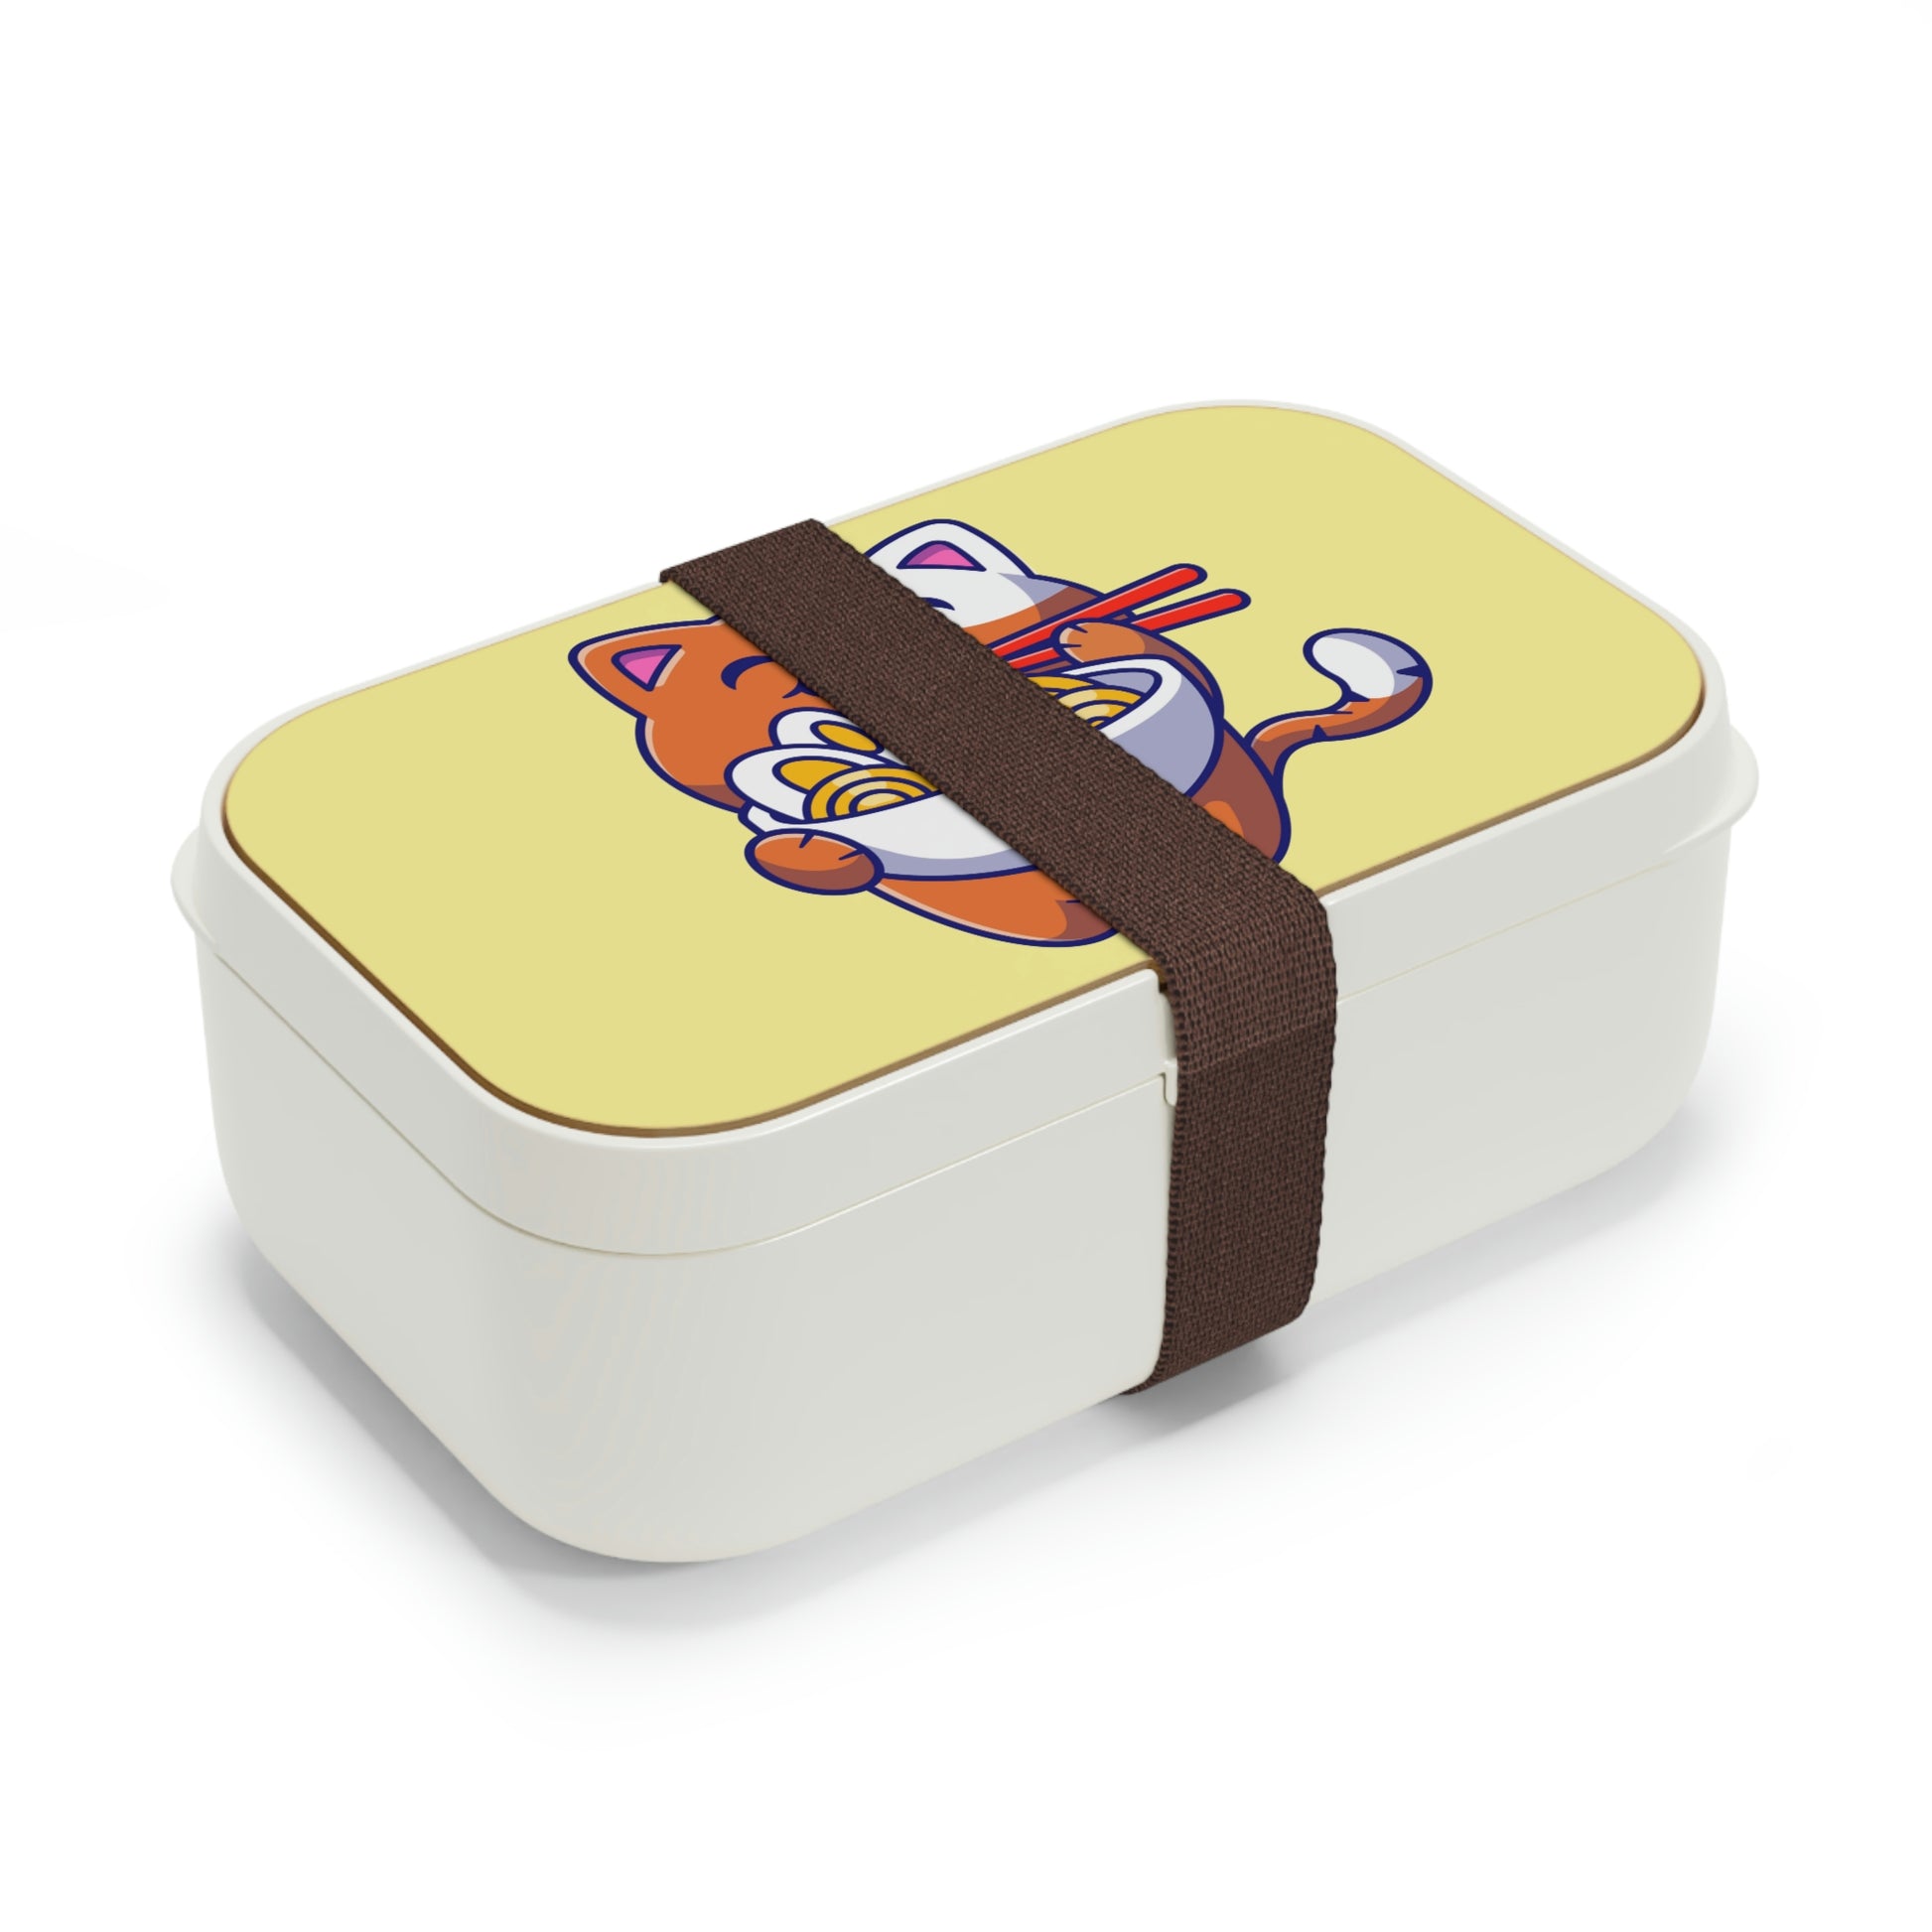 Cat Eating Ramen Bento Lunch Box, Cute Kawaii Food Container Adult Kids Women Teens Men Compartments Japanese Starcove Fashion